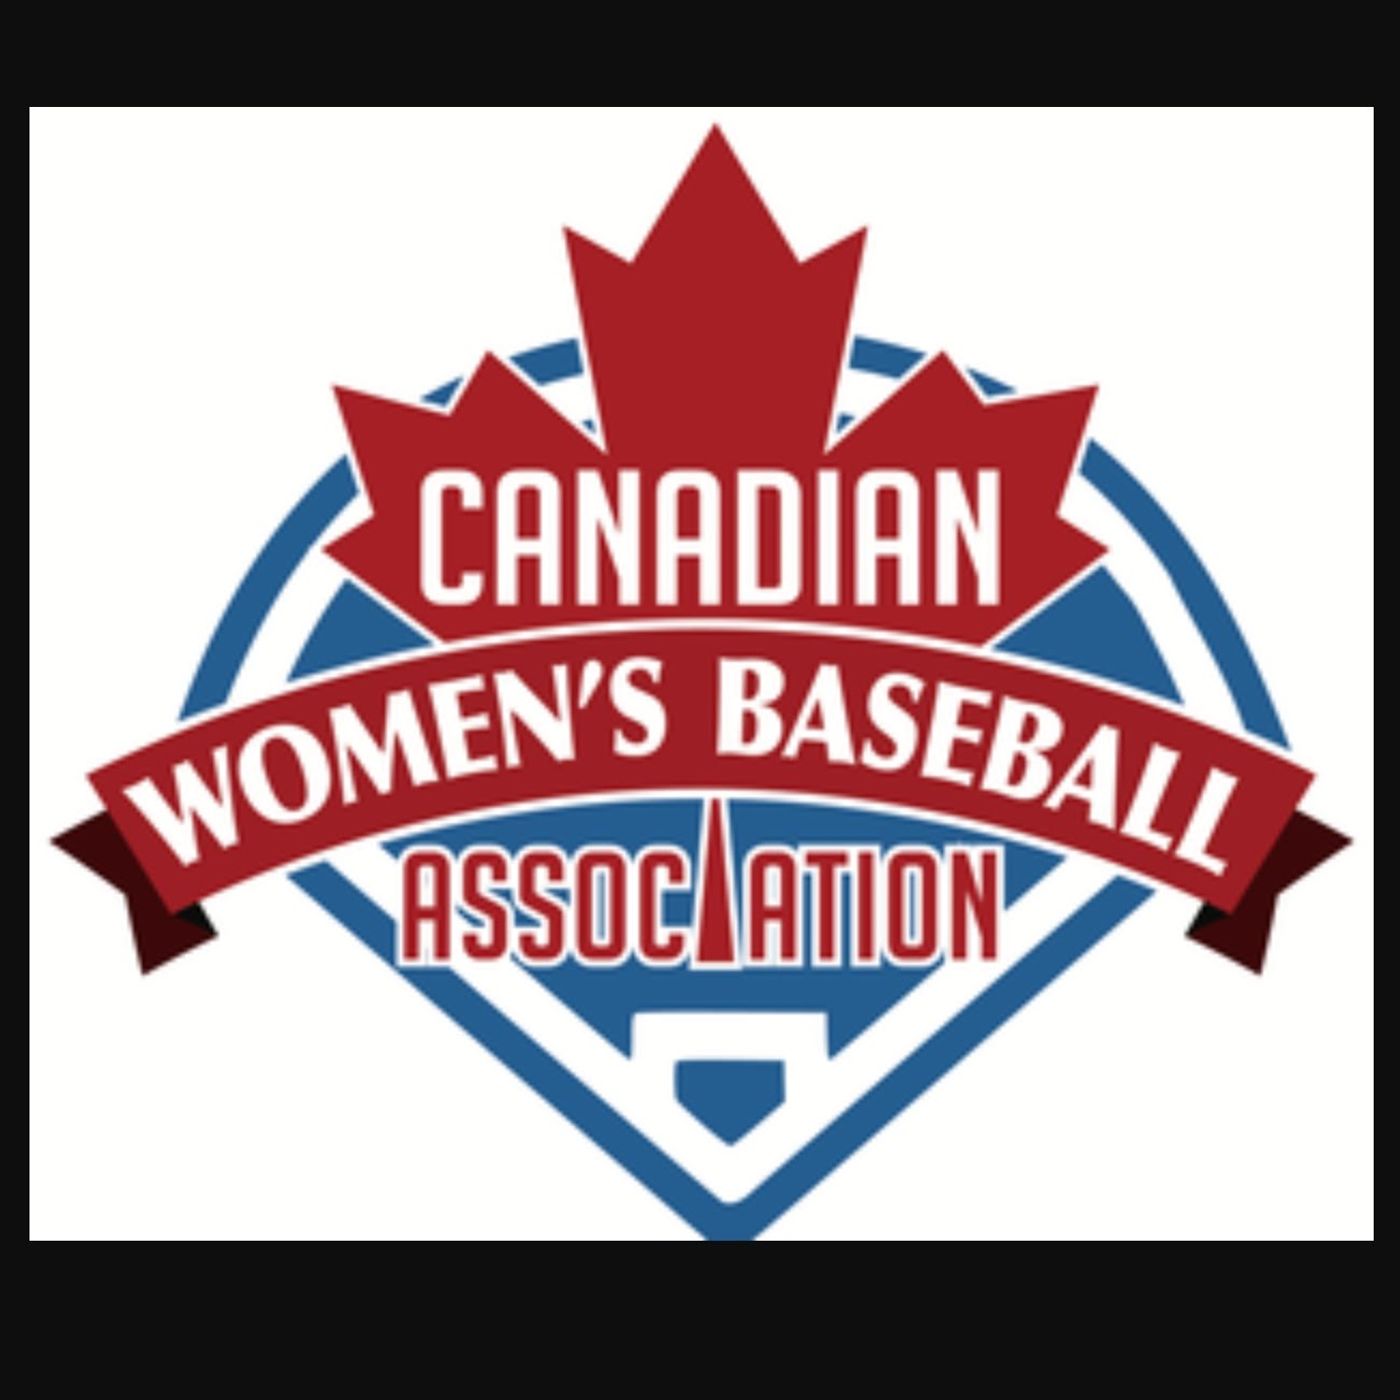 Women's/Girls Baseball is  on the rise! Find out how & why